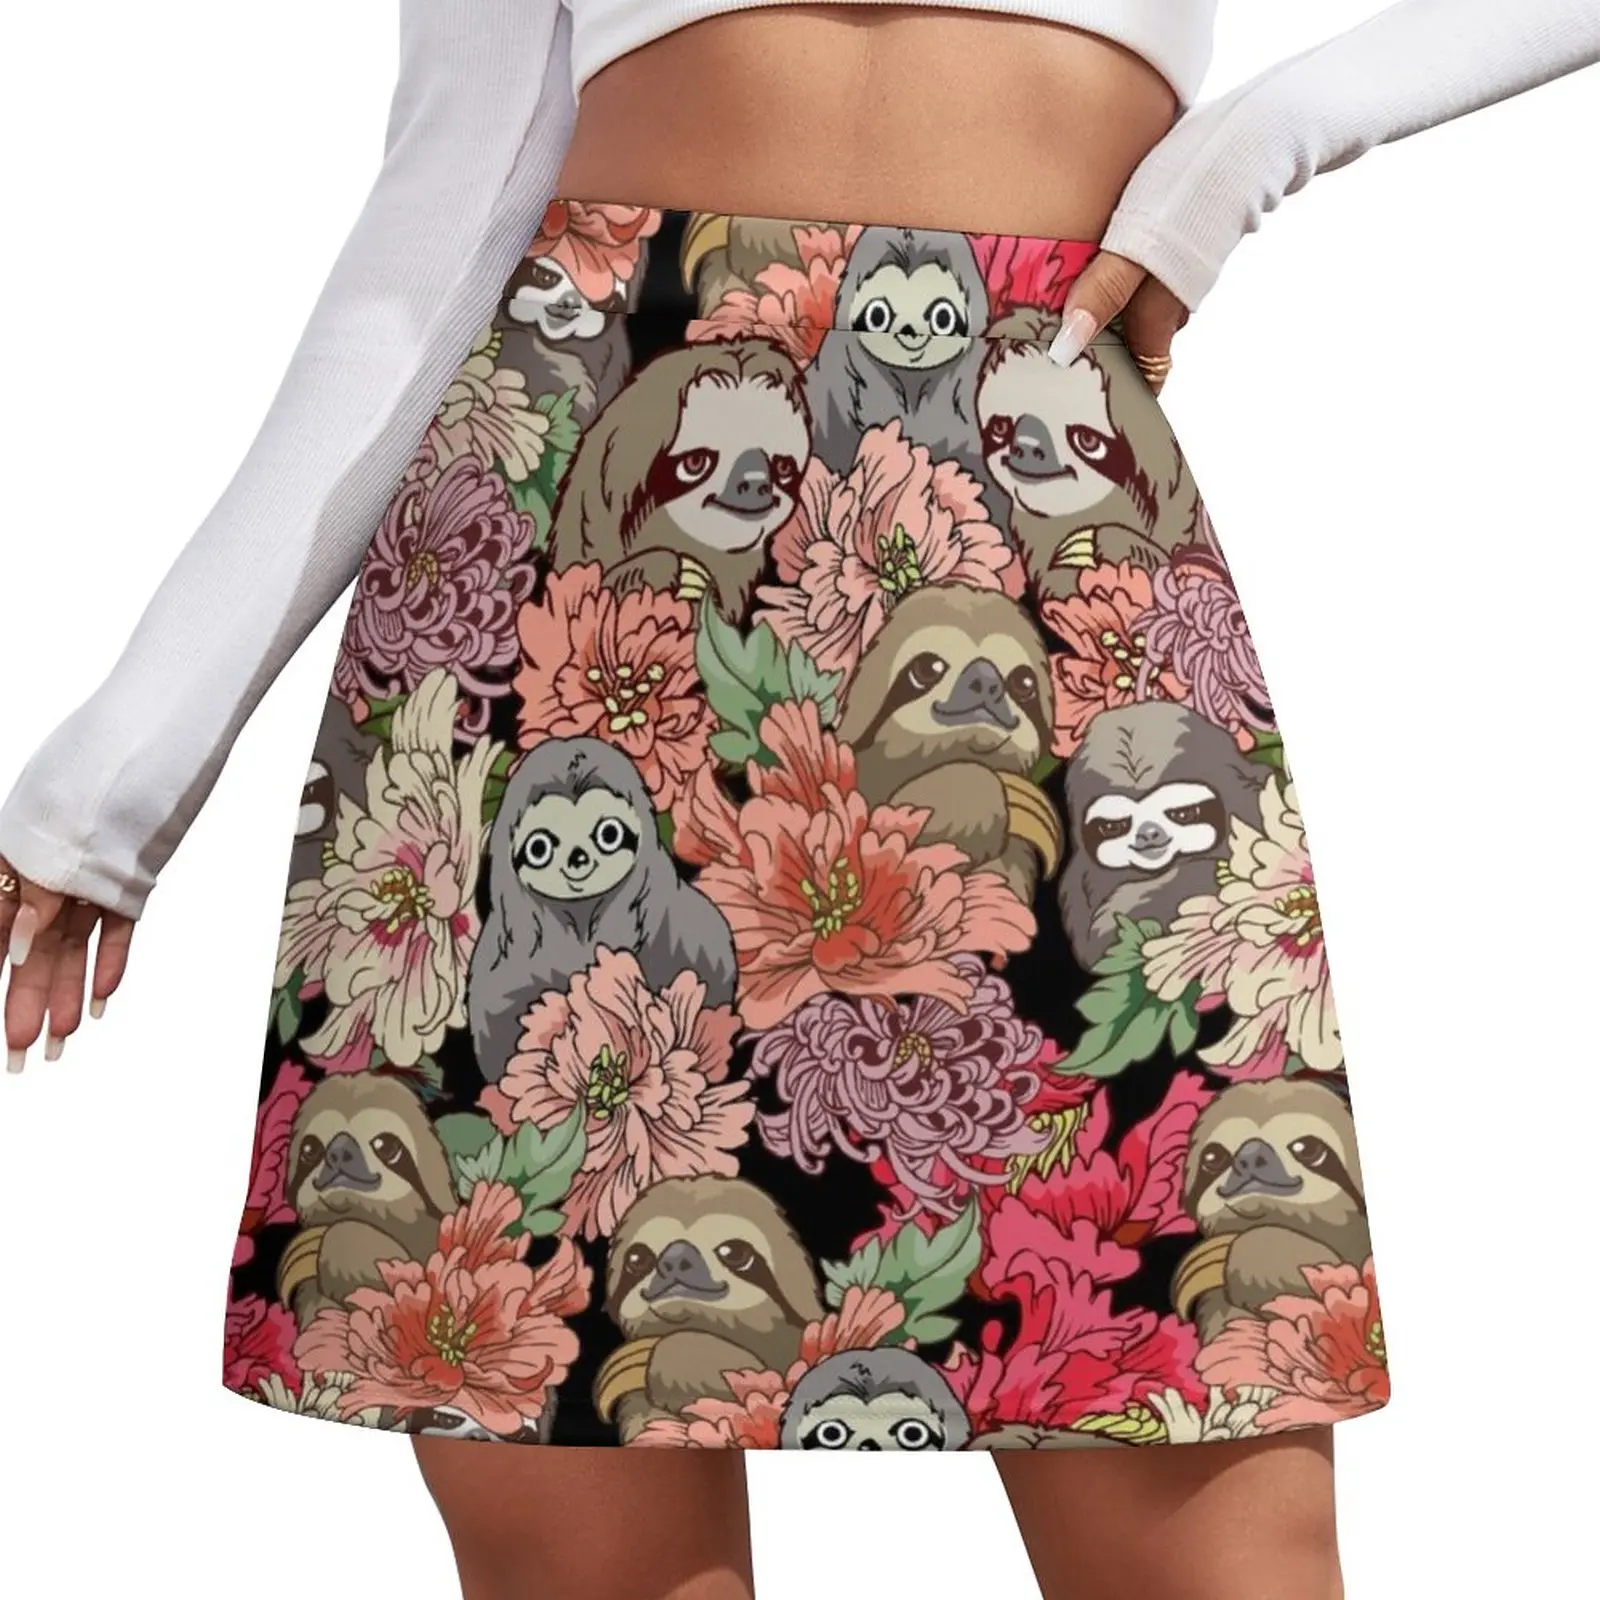 Because Sloths Mini Skirt womens skirts skirt sets short skirt outfit korean style 2023 new summer cfmoto logo print men s popular solid color short sleeved tops casual comfortable cotton sweatpants classic sets